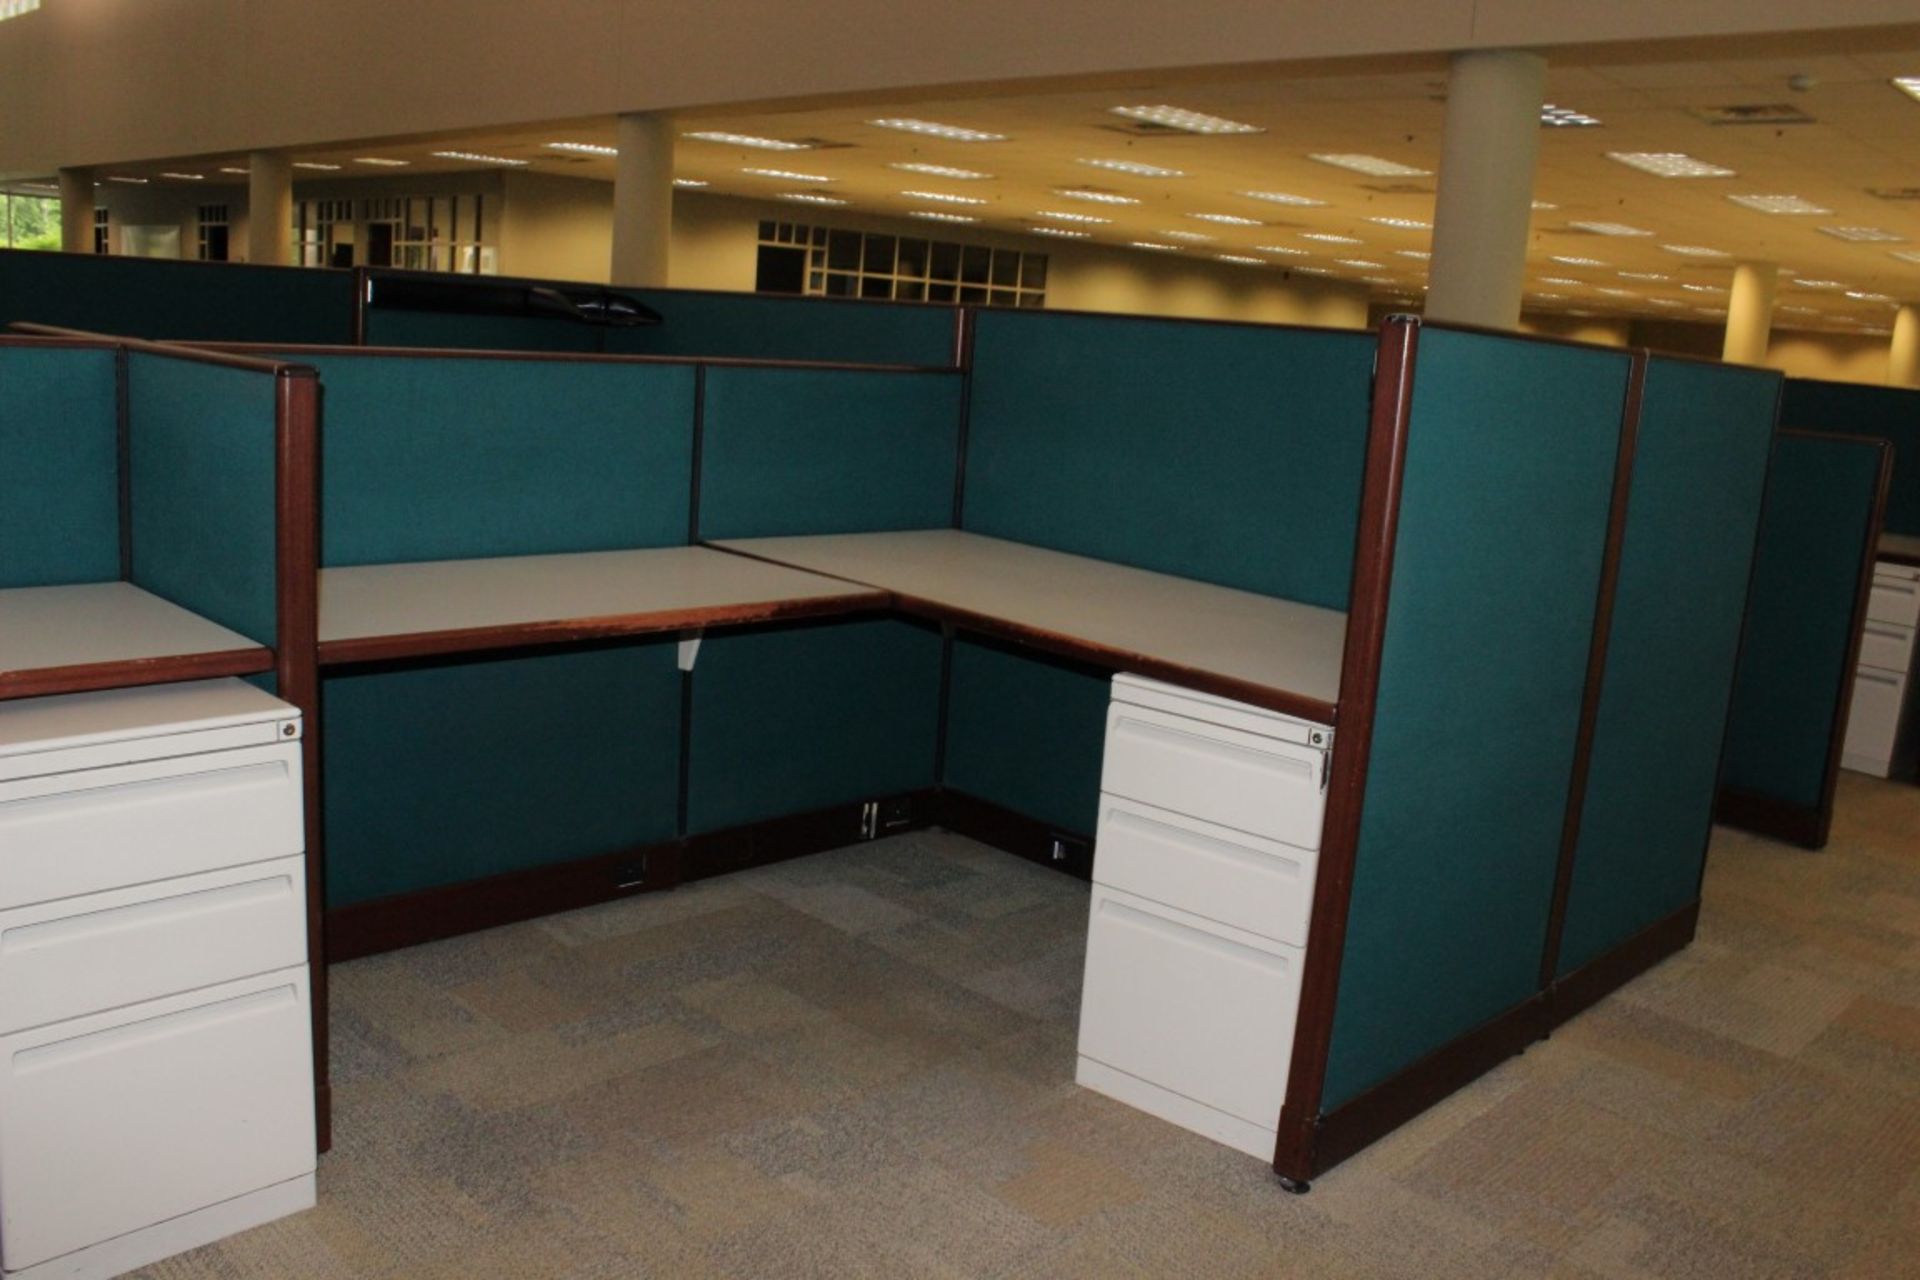 EXECUTIVE OFFICE CUBICLES. DISMANTLED & READY TO LOAD - Image 12 of 15